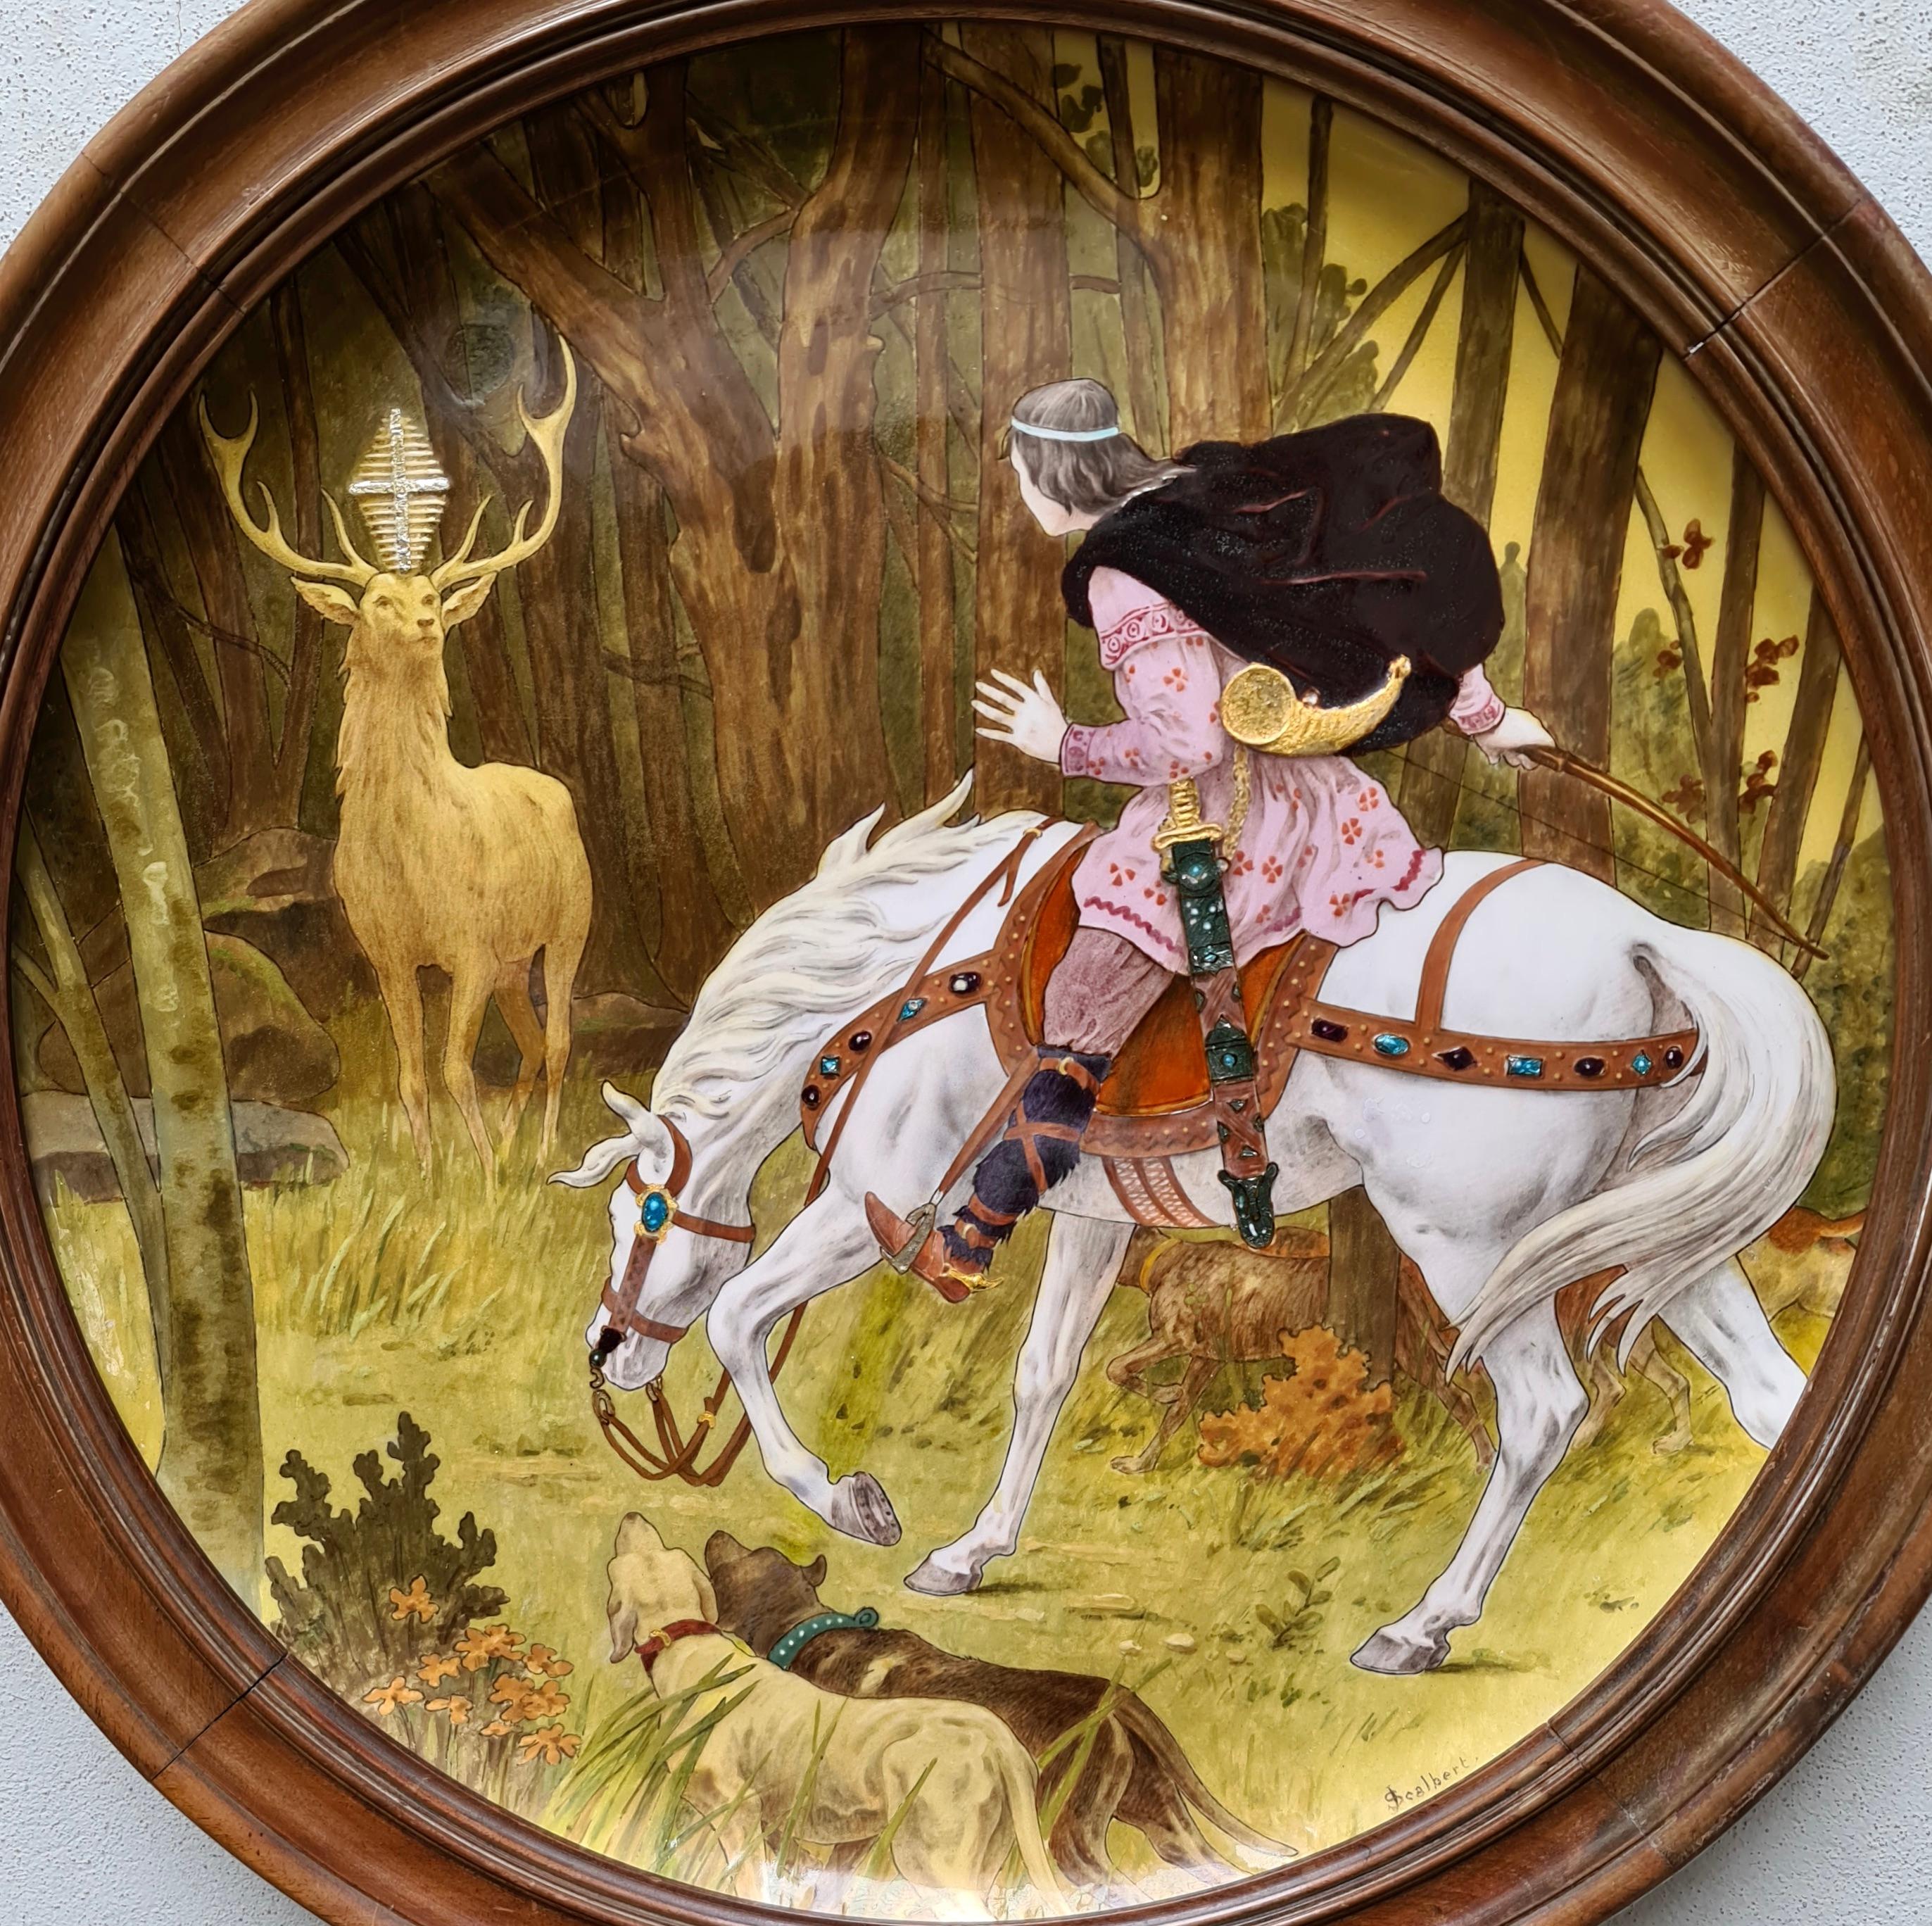 A 19th century enameled Sèvres Faience impressive framed charger
hand painted by Jules Scalbert for Optat Milet, Sèvres 
Depicting The St Hubert Miracle during Deer Hunting
Signed J.Scalbert on the design and Impressed Optat Milet Sèvres on the